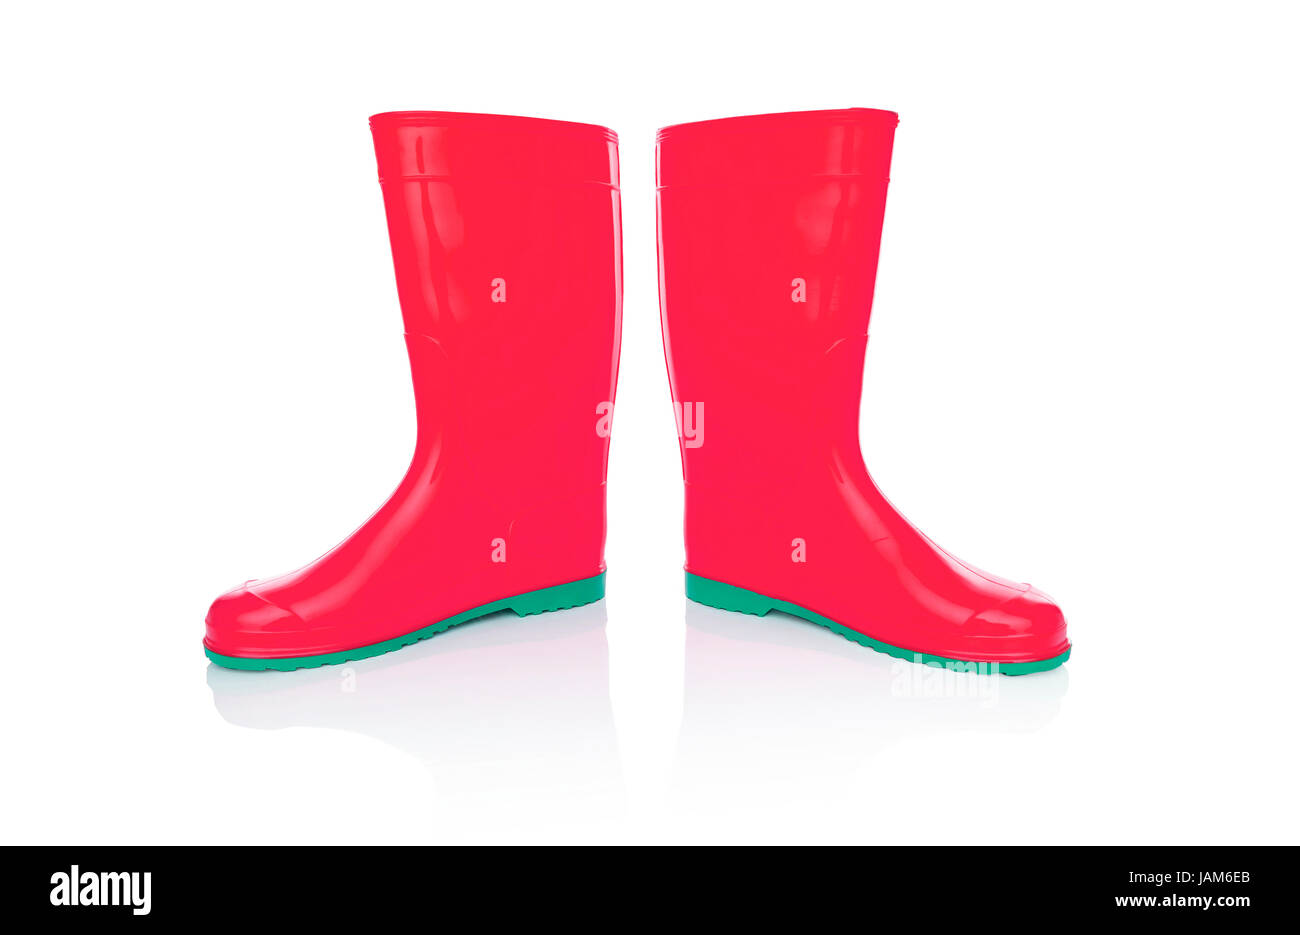 Red rubber boots. Isolated on white background Stock Photo - Alamy